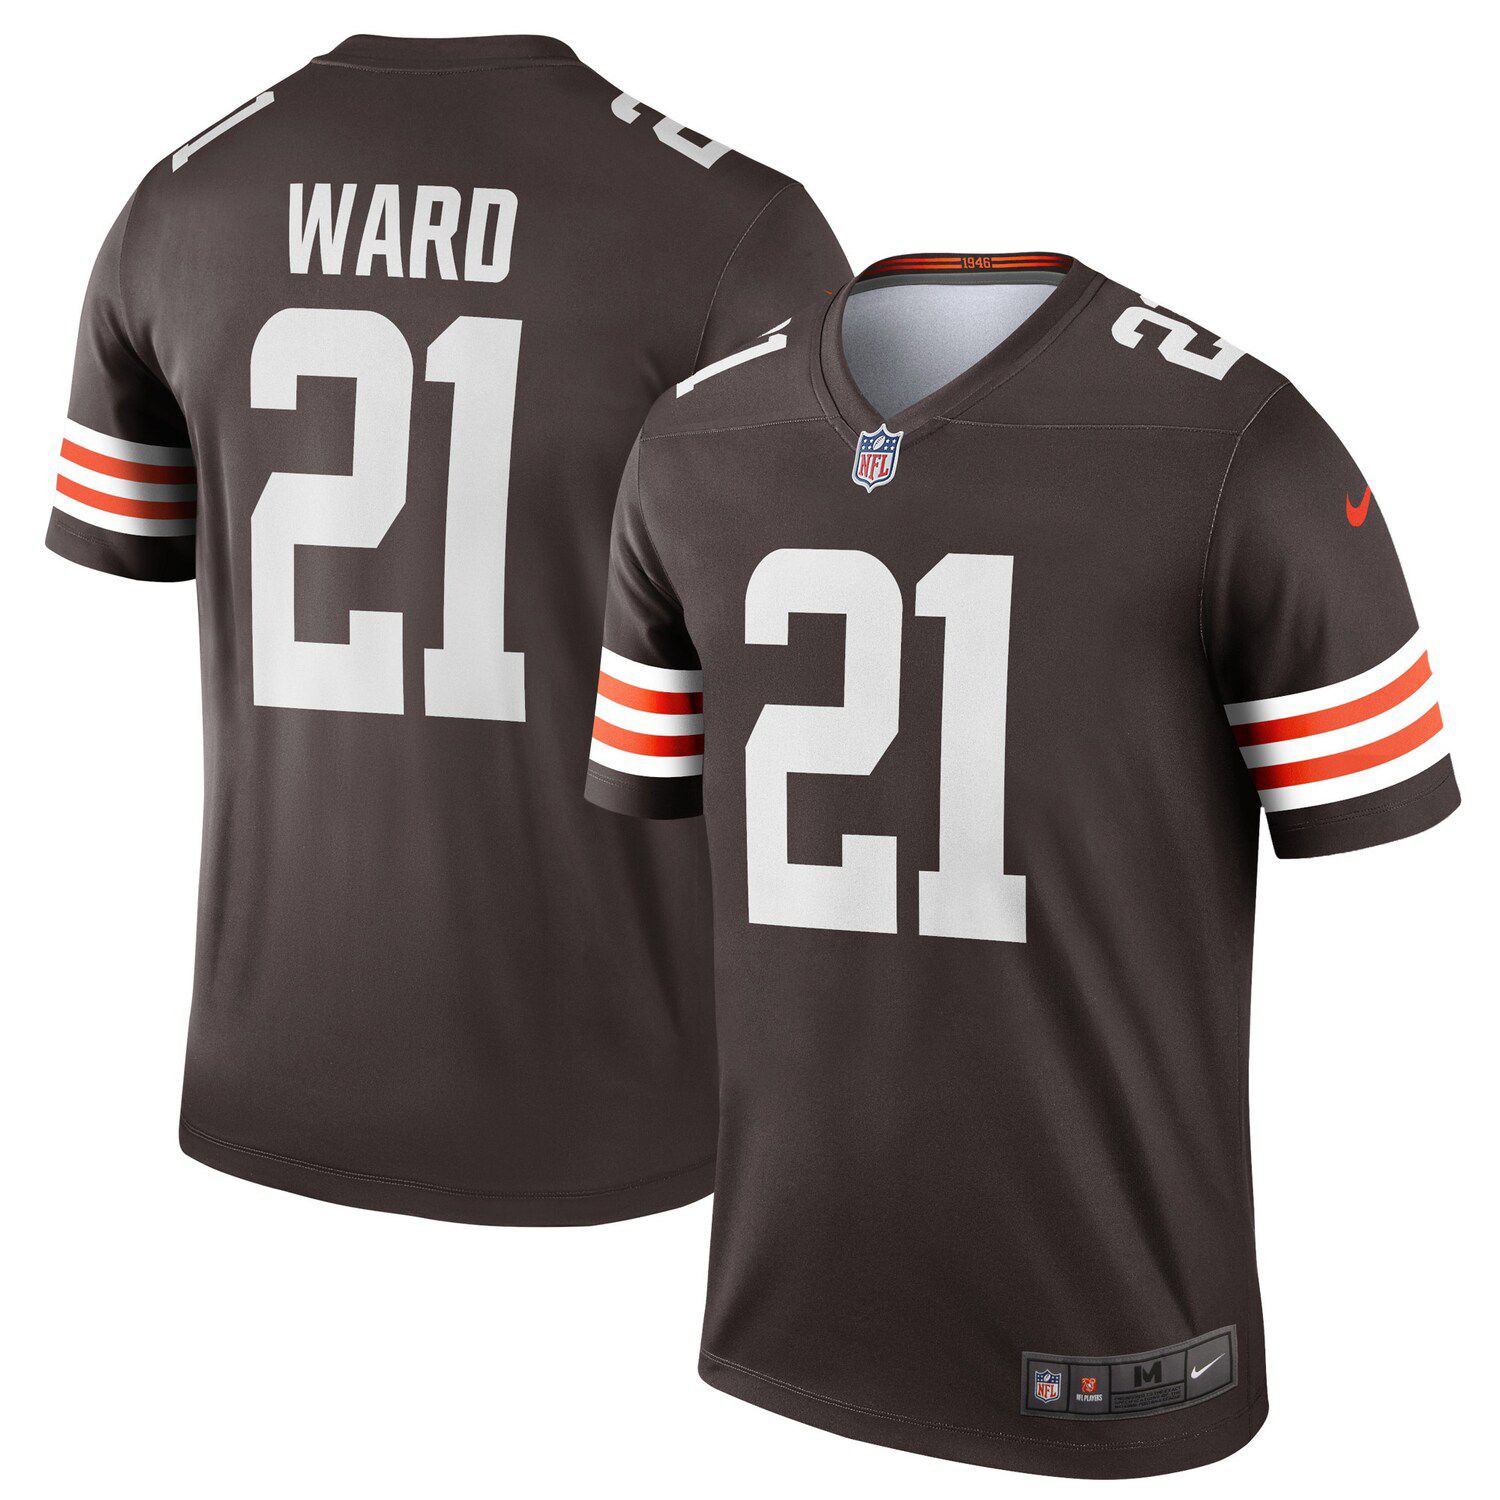 cleveland browns mens jersey